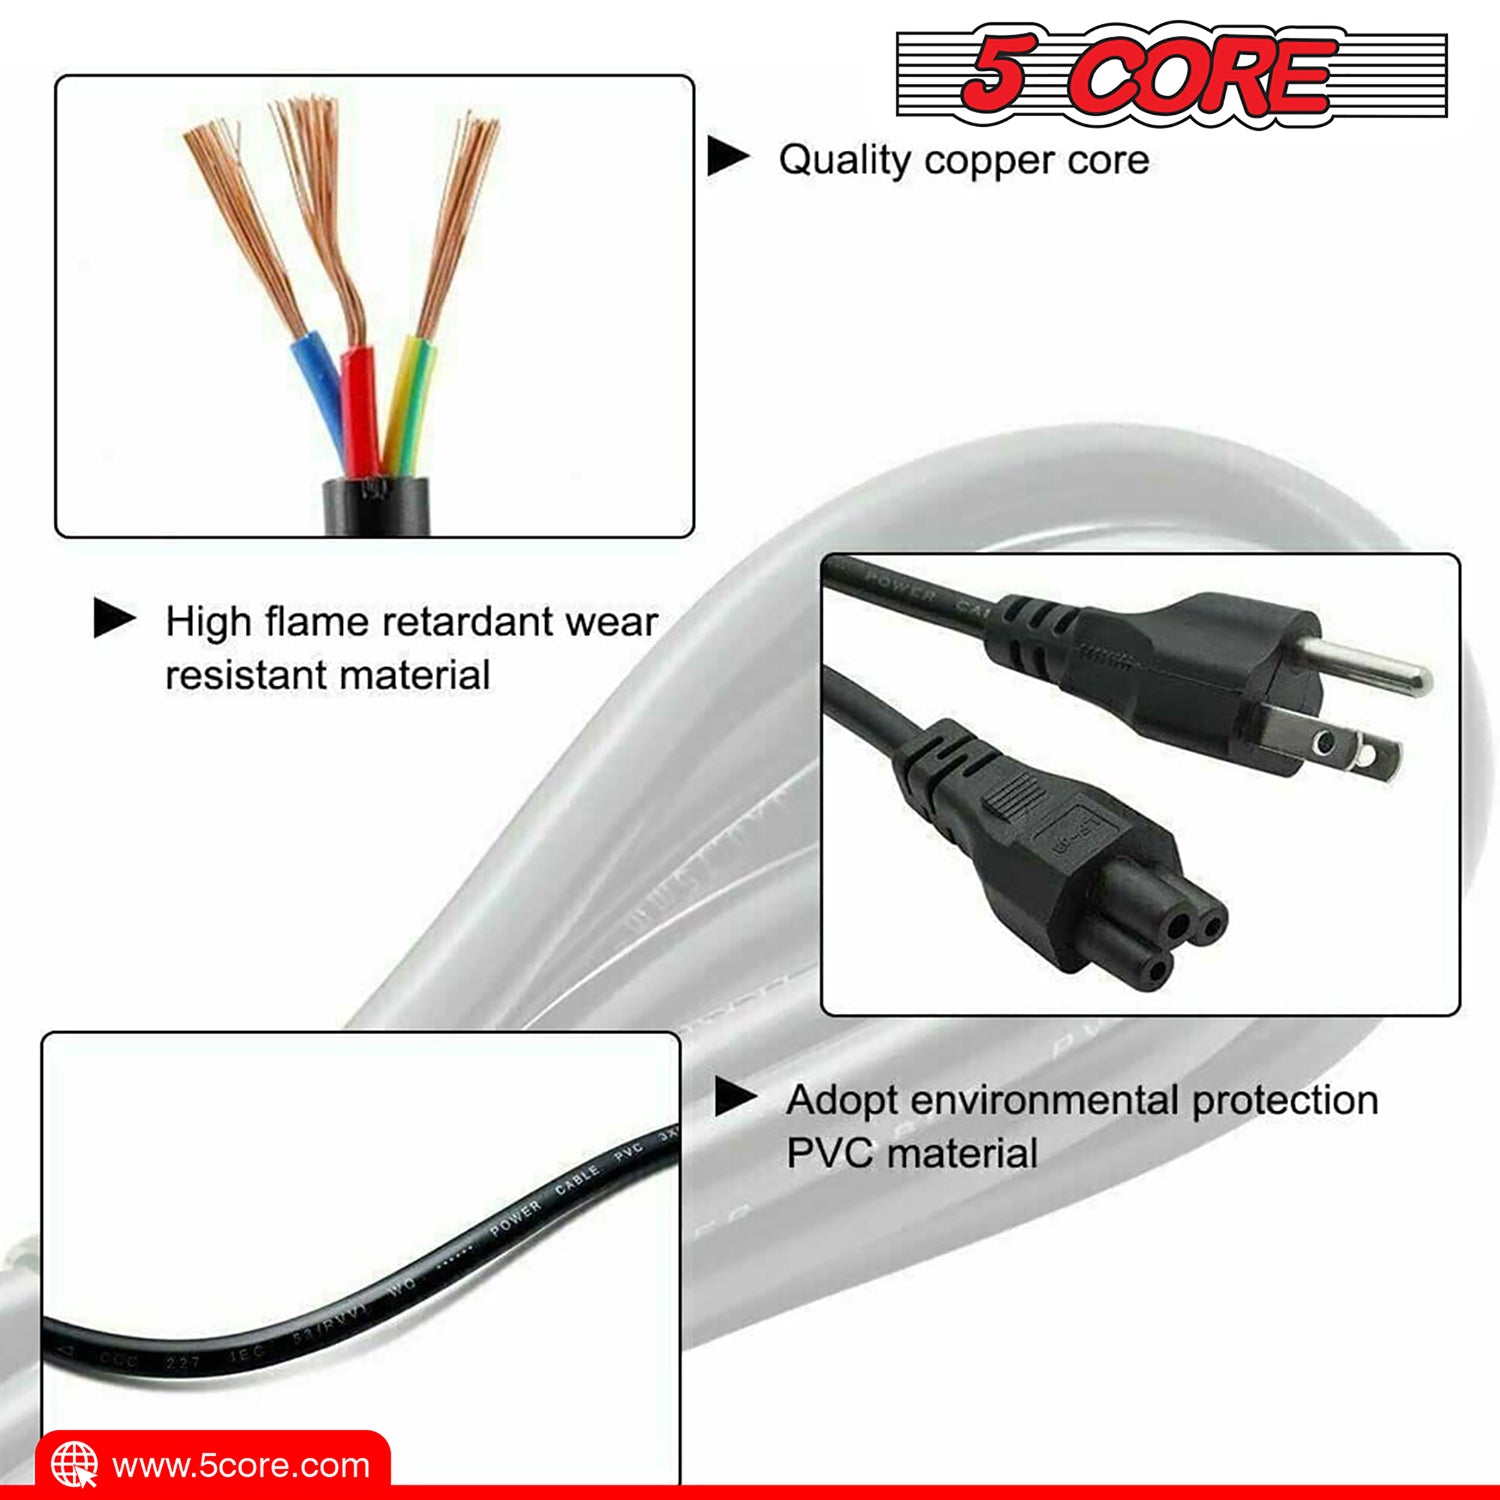 5Core AC Power Extension Cord 10ft Wall Plug 3 Slot Polarized 18AWG 10A 7A 125V Heavy Duty Wire